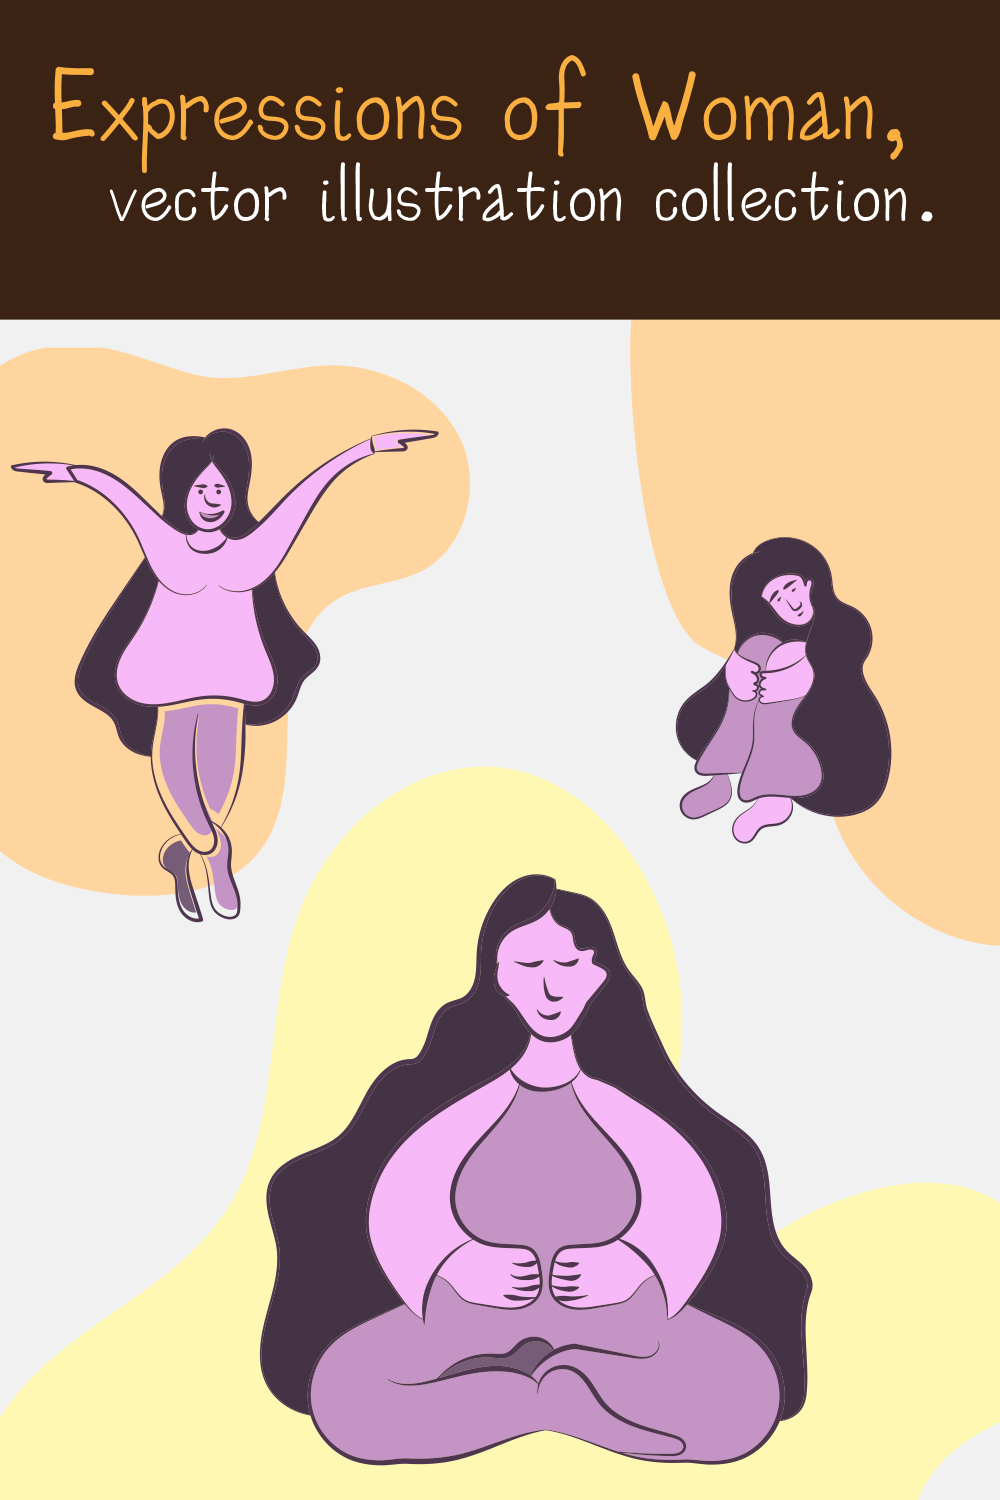 Expressions of Woman, vector illustration collection pinterest preview image.